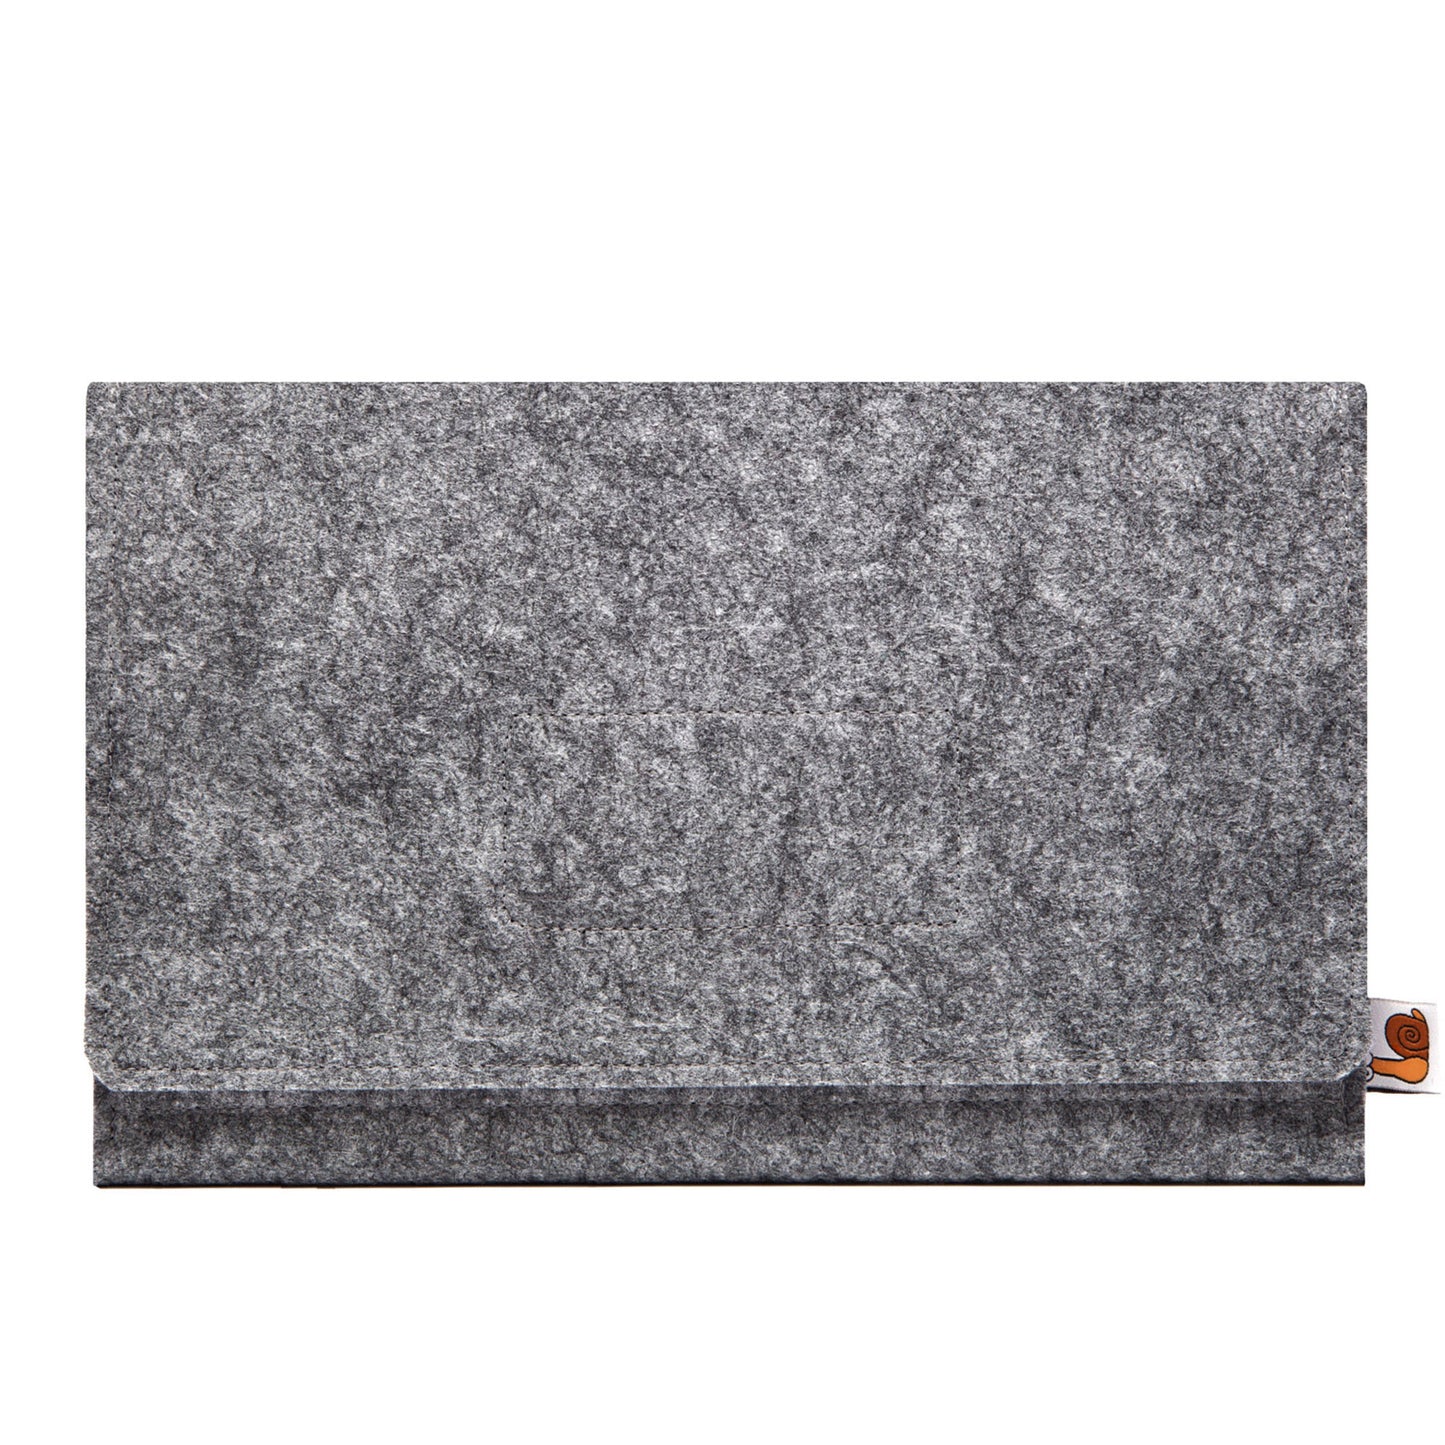 Premium Felt iPad Cover: Ultimate Protection with Accessories Pocket - Grey & Sky Blue